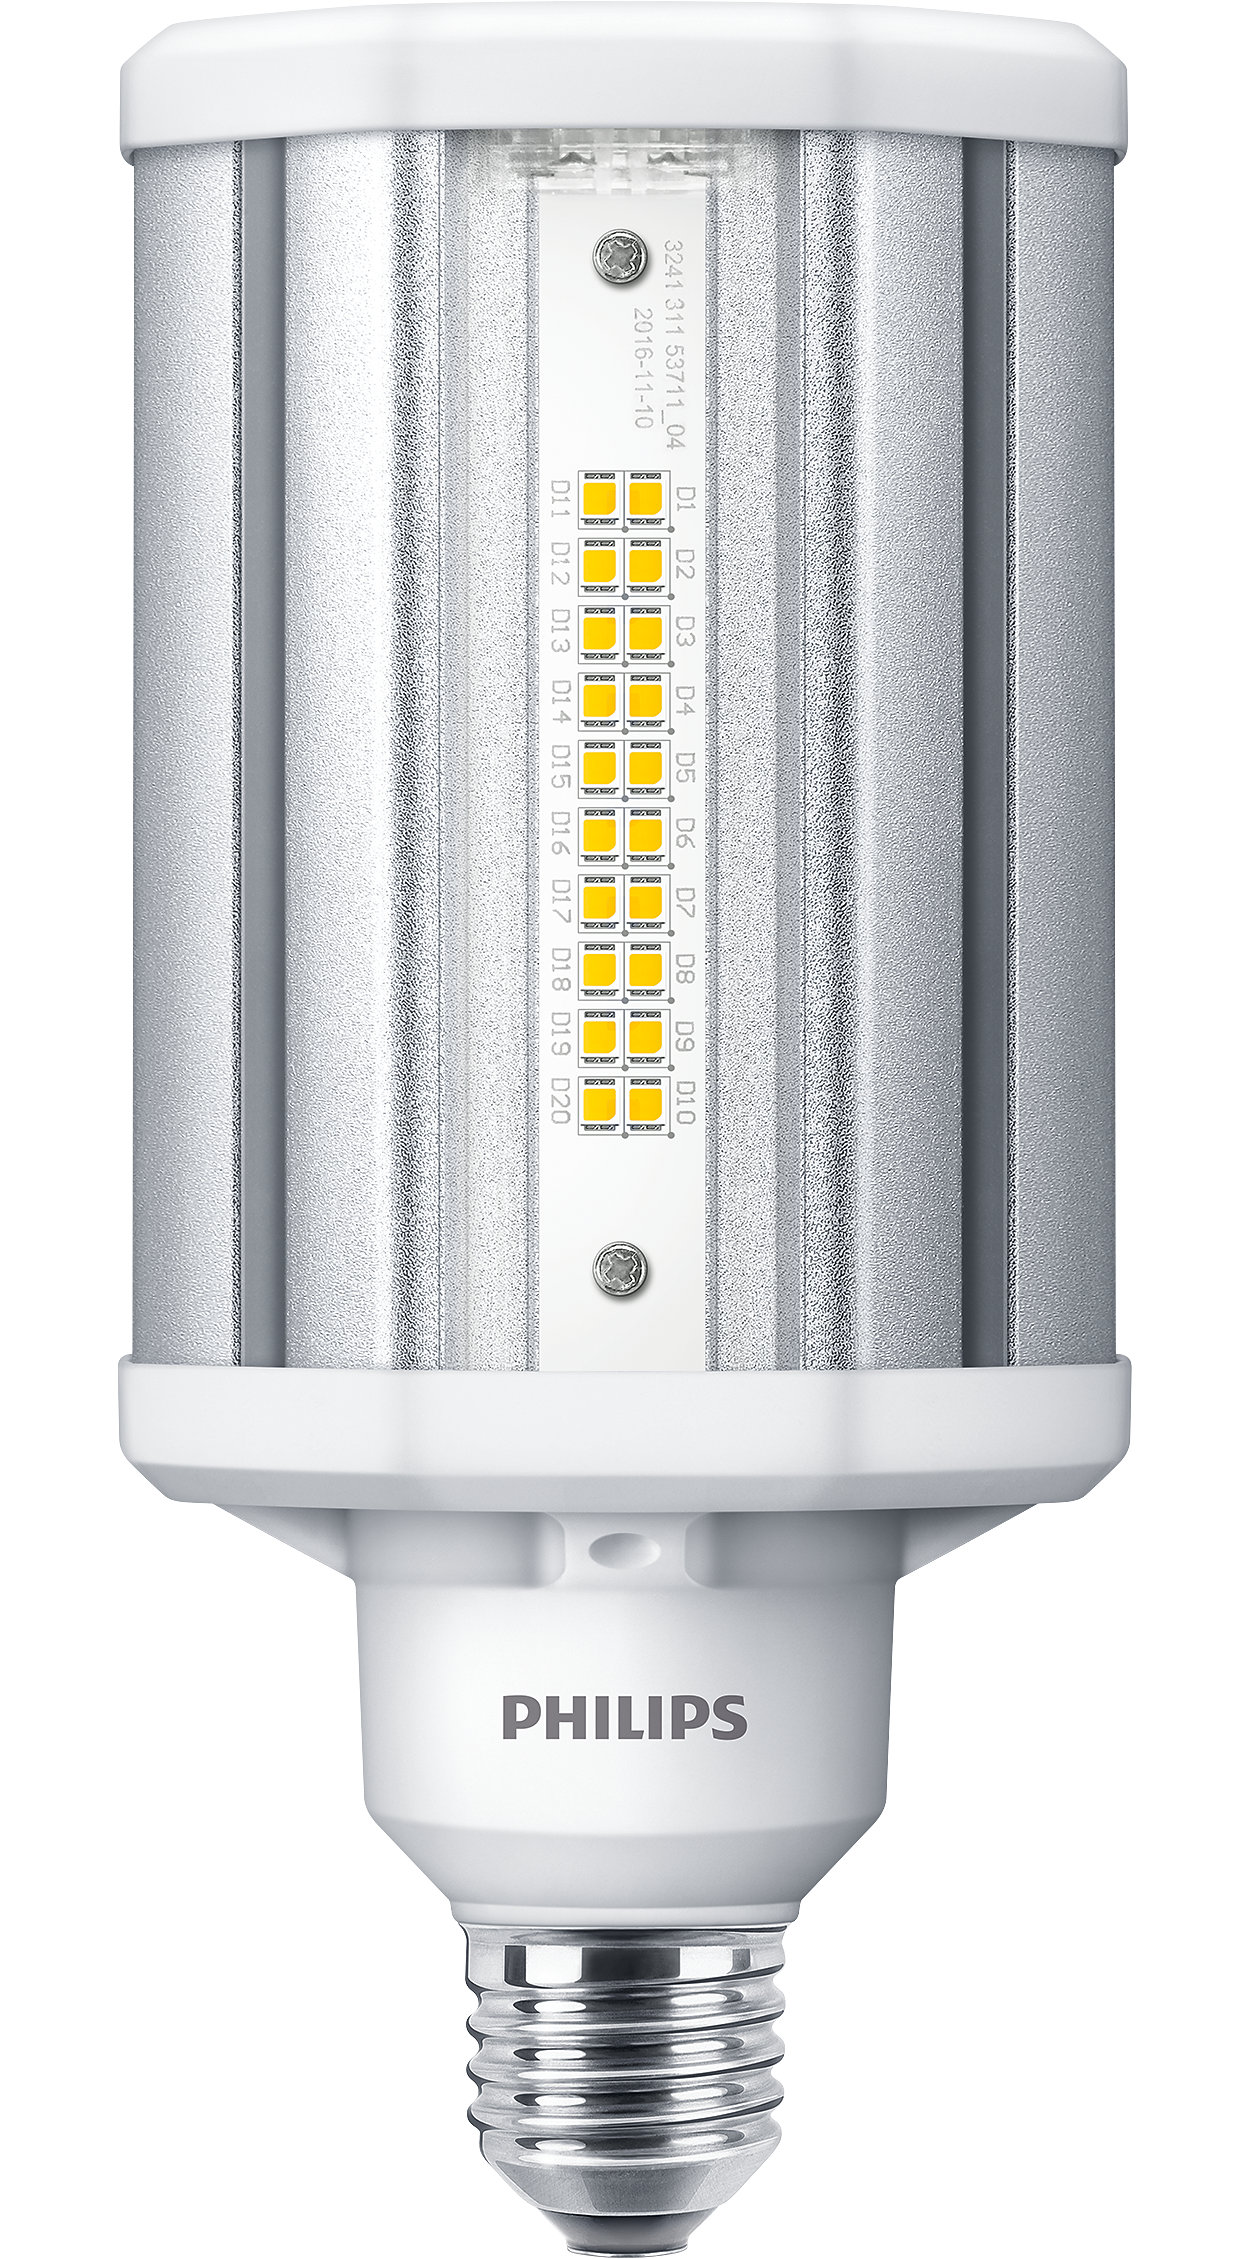 The best LED solution for High-Intensity Discharge (HID) lamp replacement